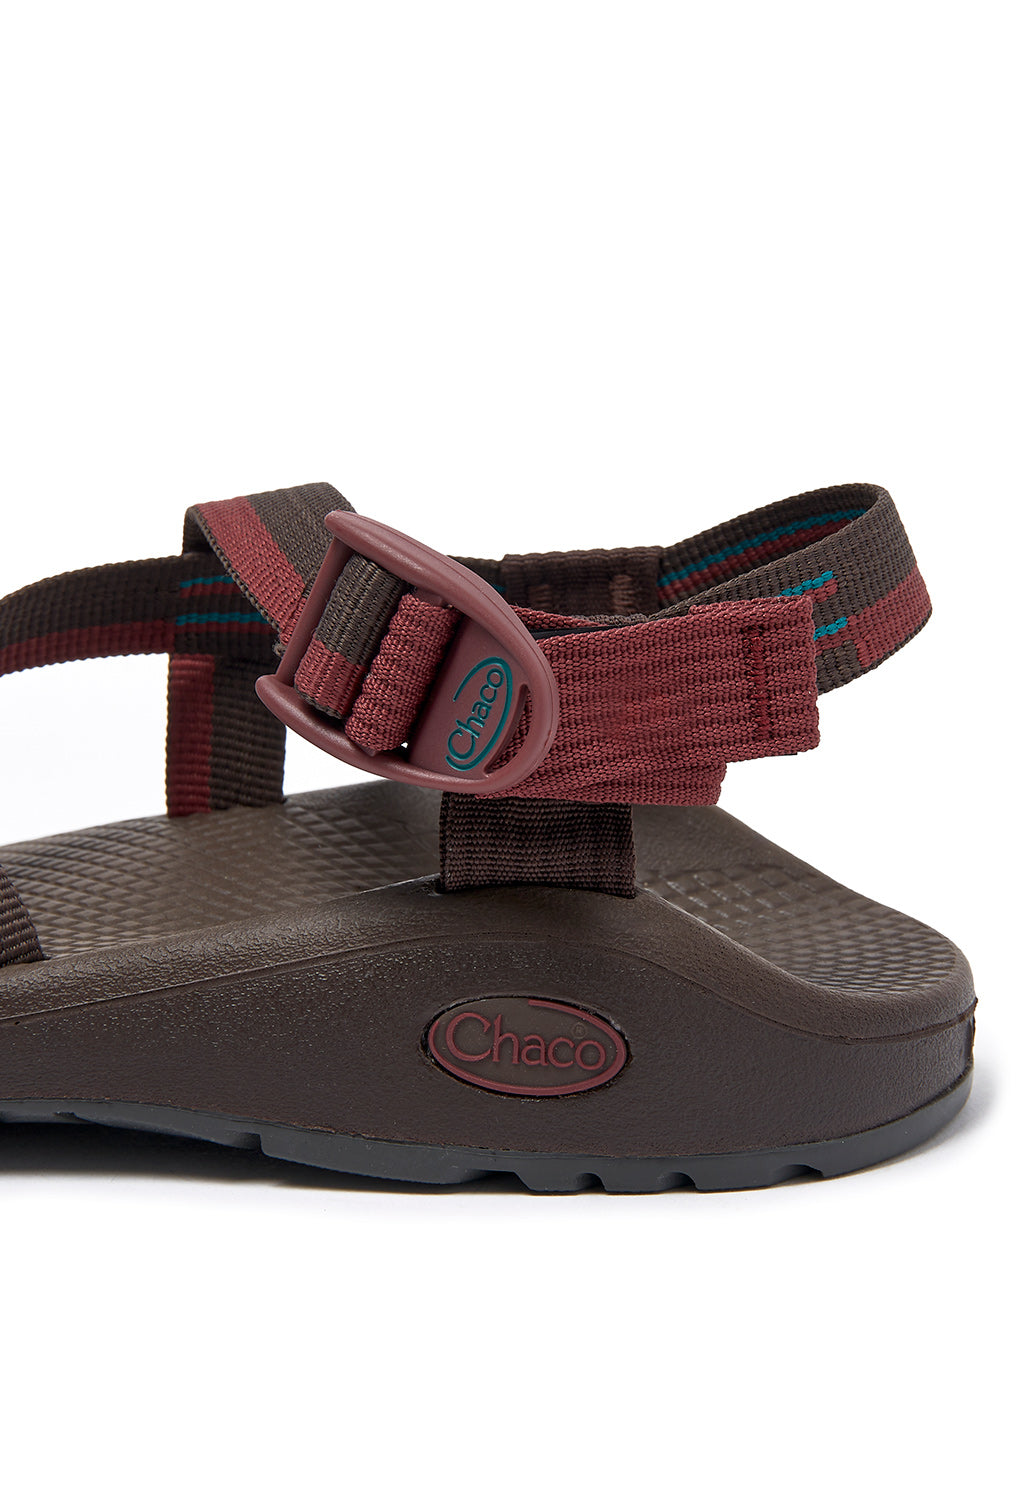 Chaco Women's Z Cloud Sandals - Ply Chocolate